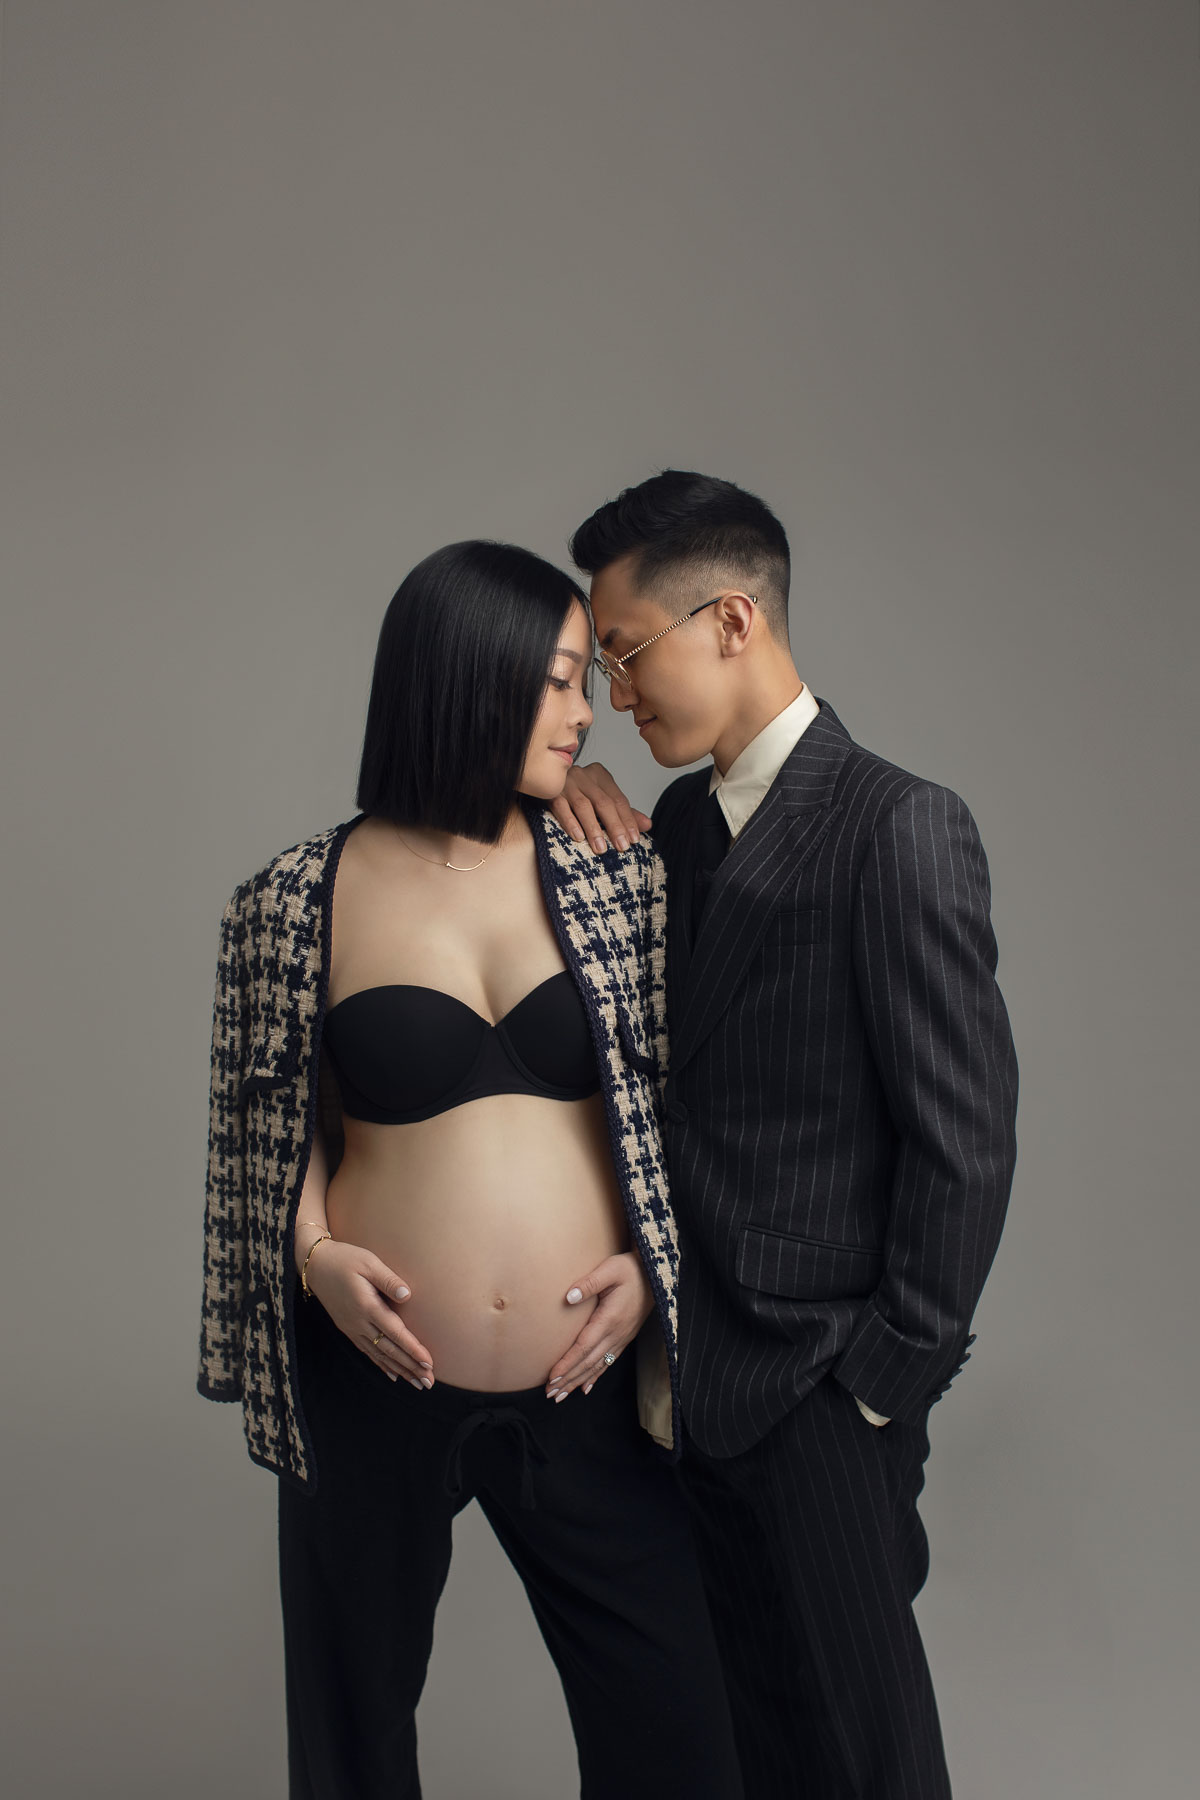 professional studio lighting and stunning pregnancy photoshoot in Vancouver